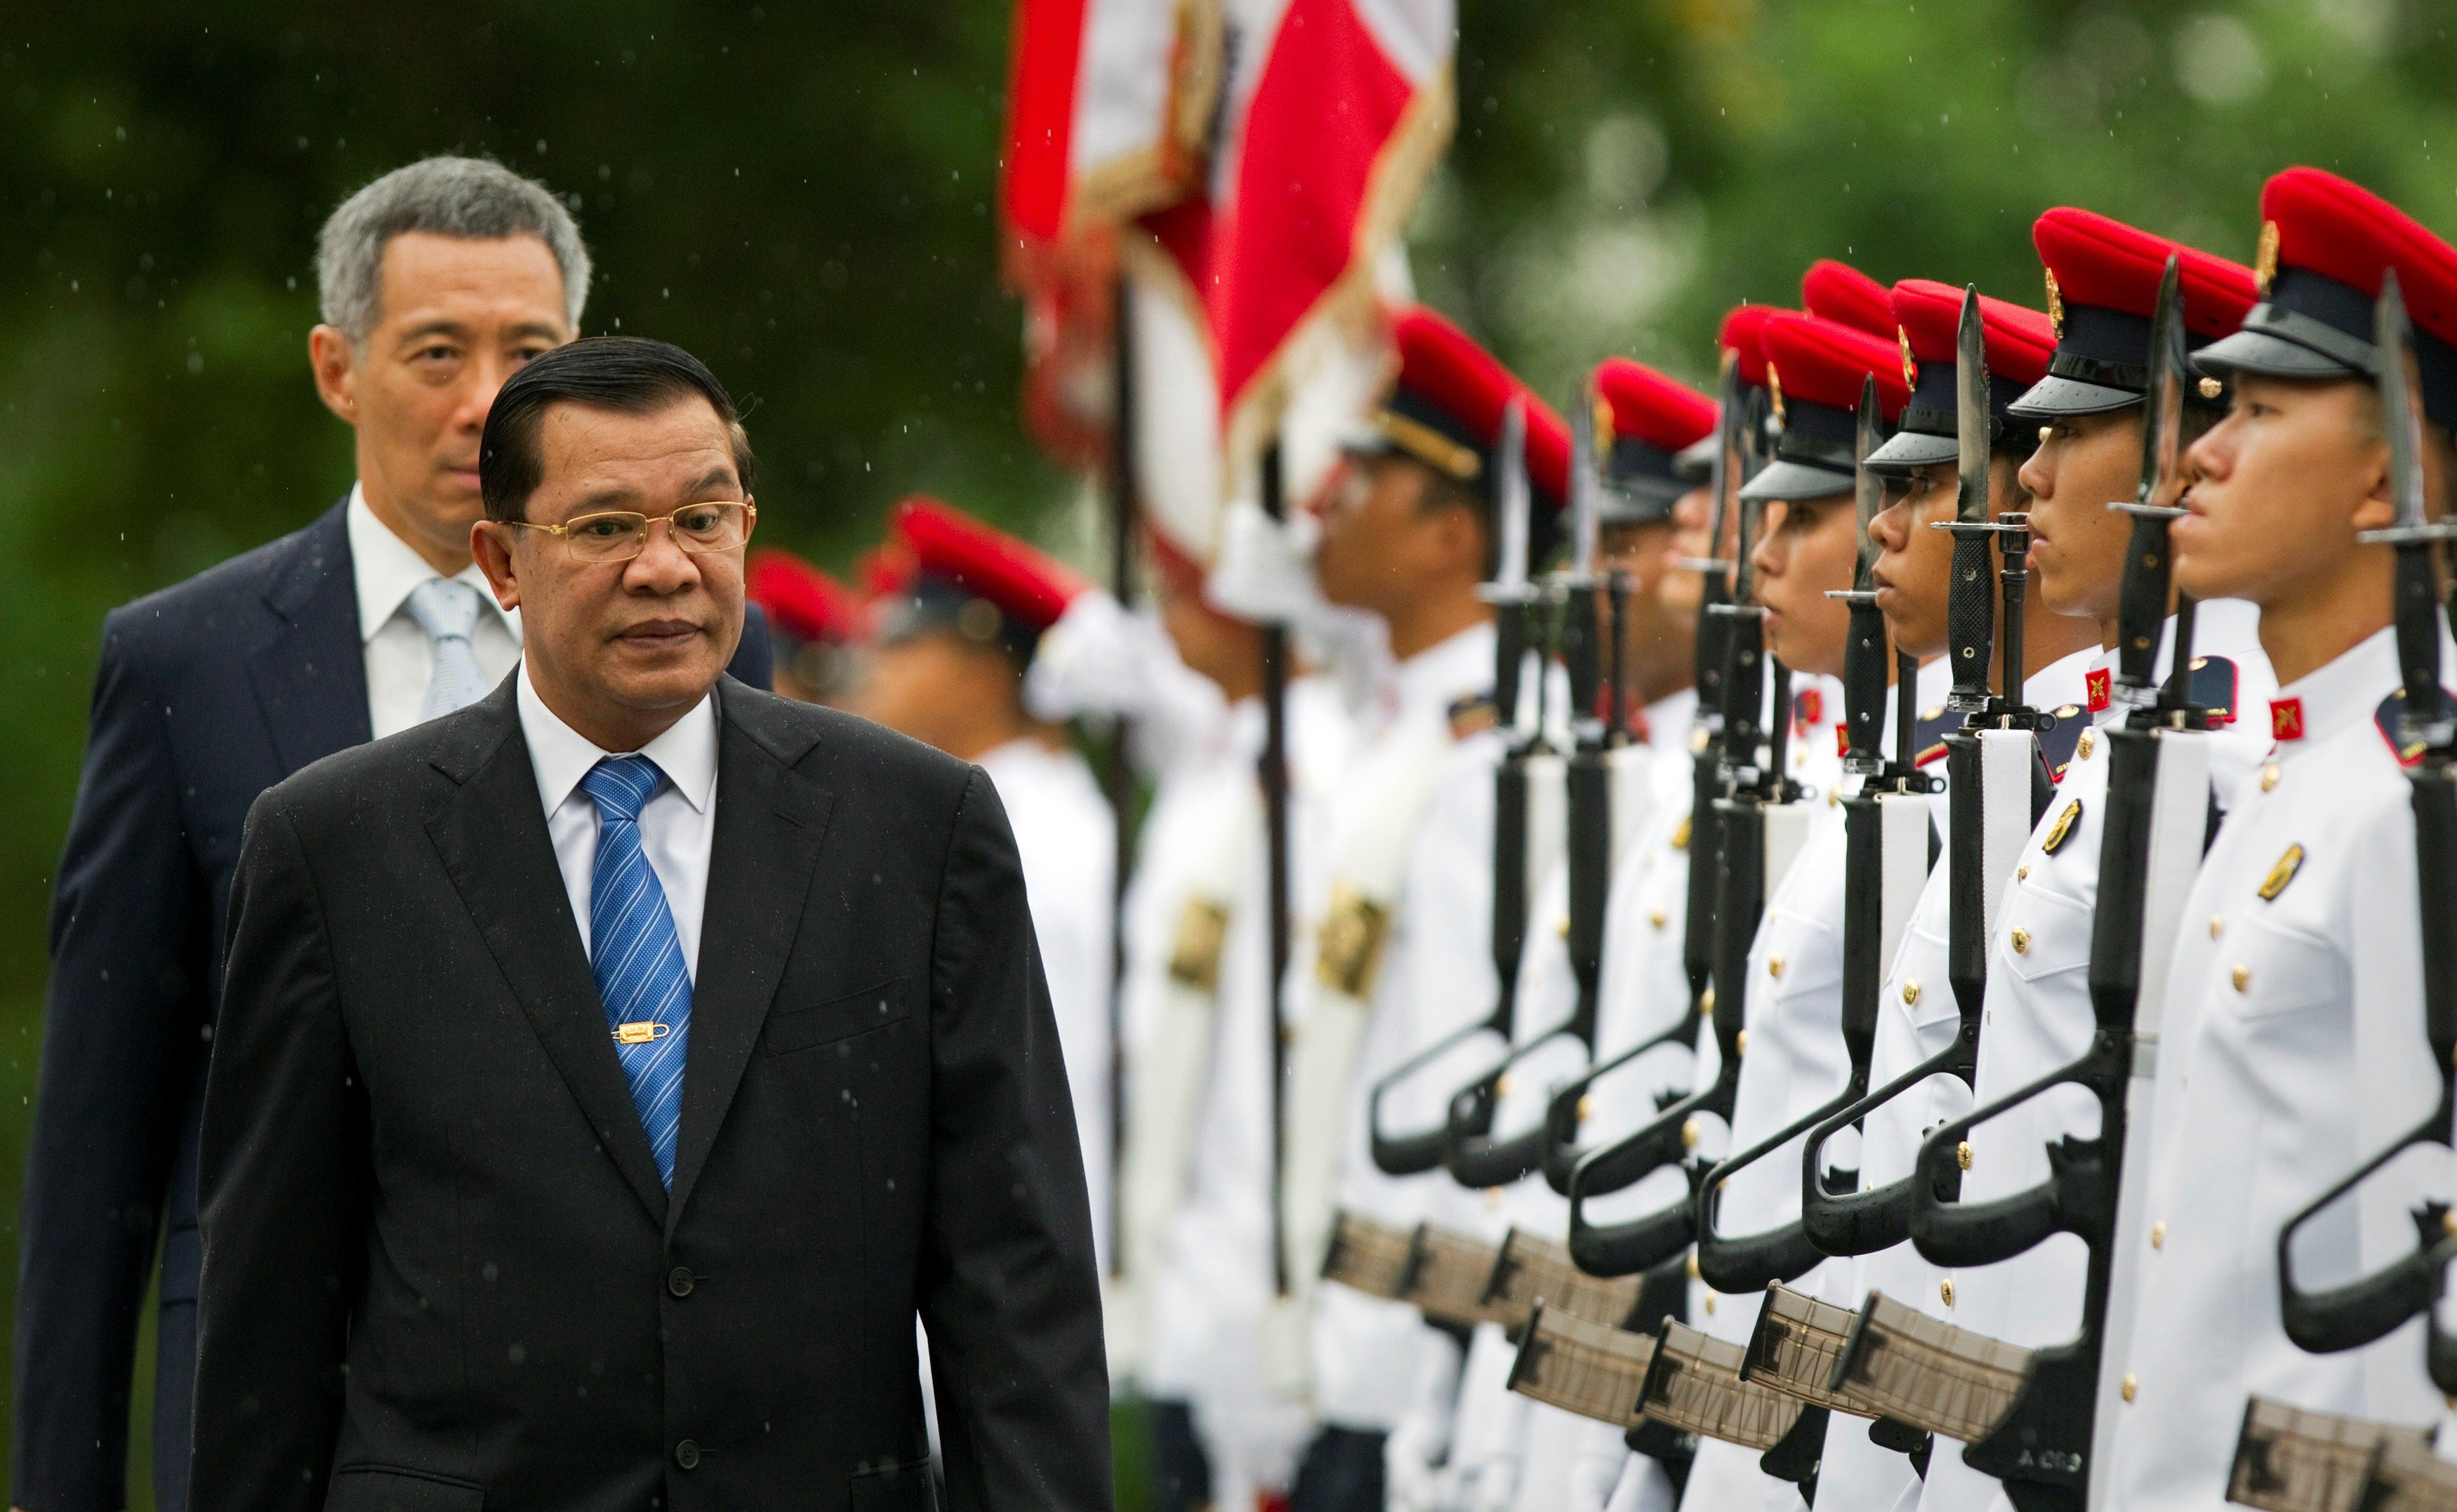 Cambodia's Prime Minister Hun Sen (front) with Lee Hsien Loong in Singapore. Photo: Reuters